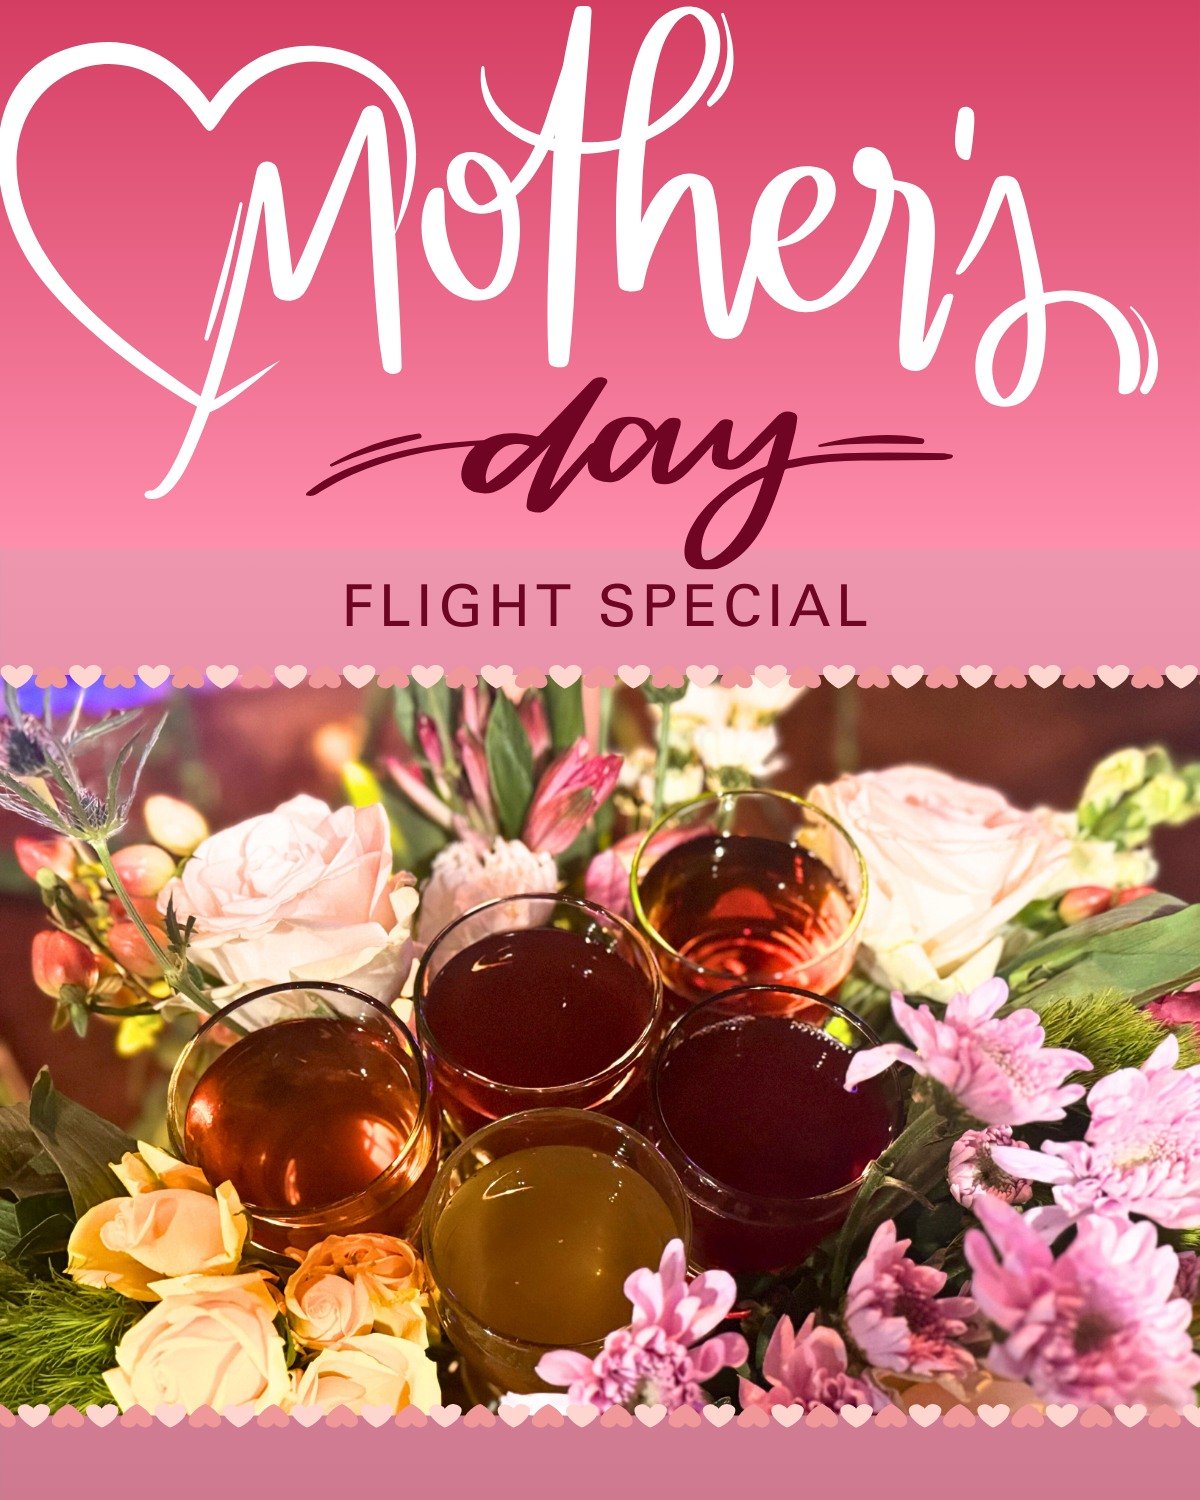 We're excited to bring a special flight to the tap room just for the moms! 

All weekend, starting Thursday, we will be putting together a spring floral flight with:
🩷Cherry Godmother - Cherry blossom plum 
🩷BILF- Blackberry infused Lavender
🩷Saxo